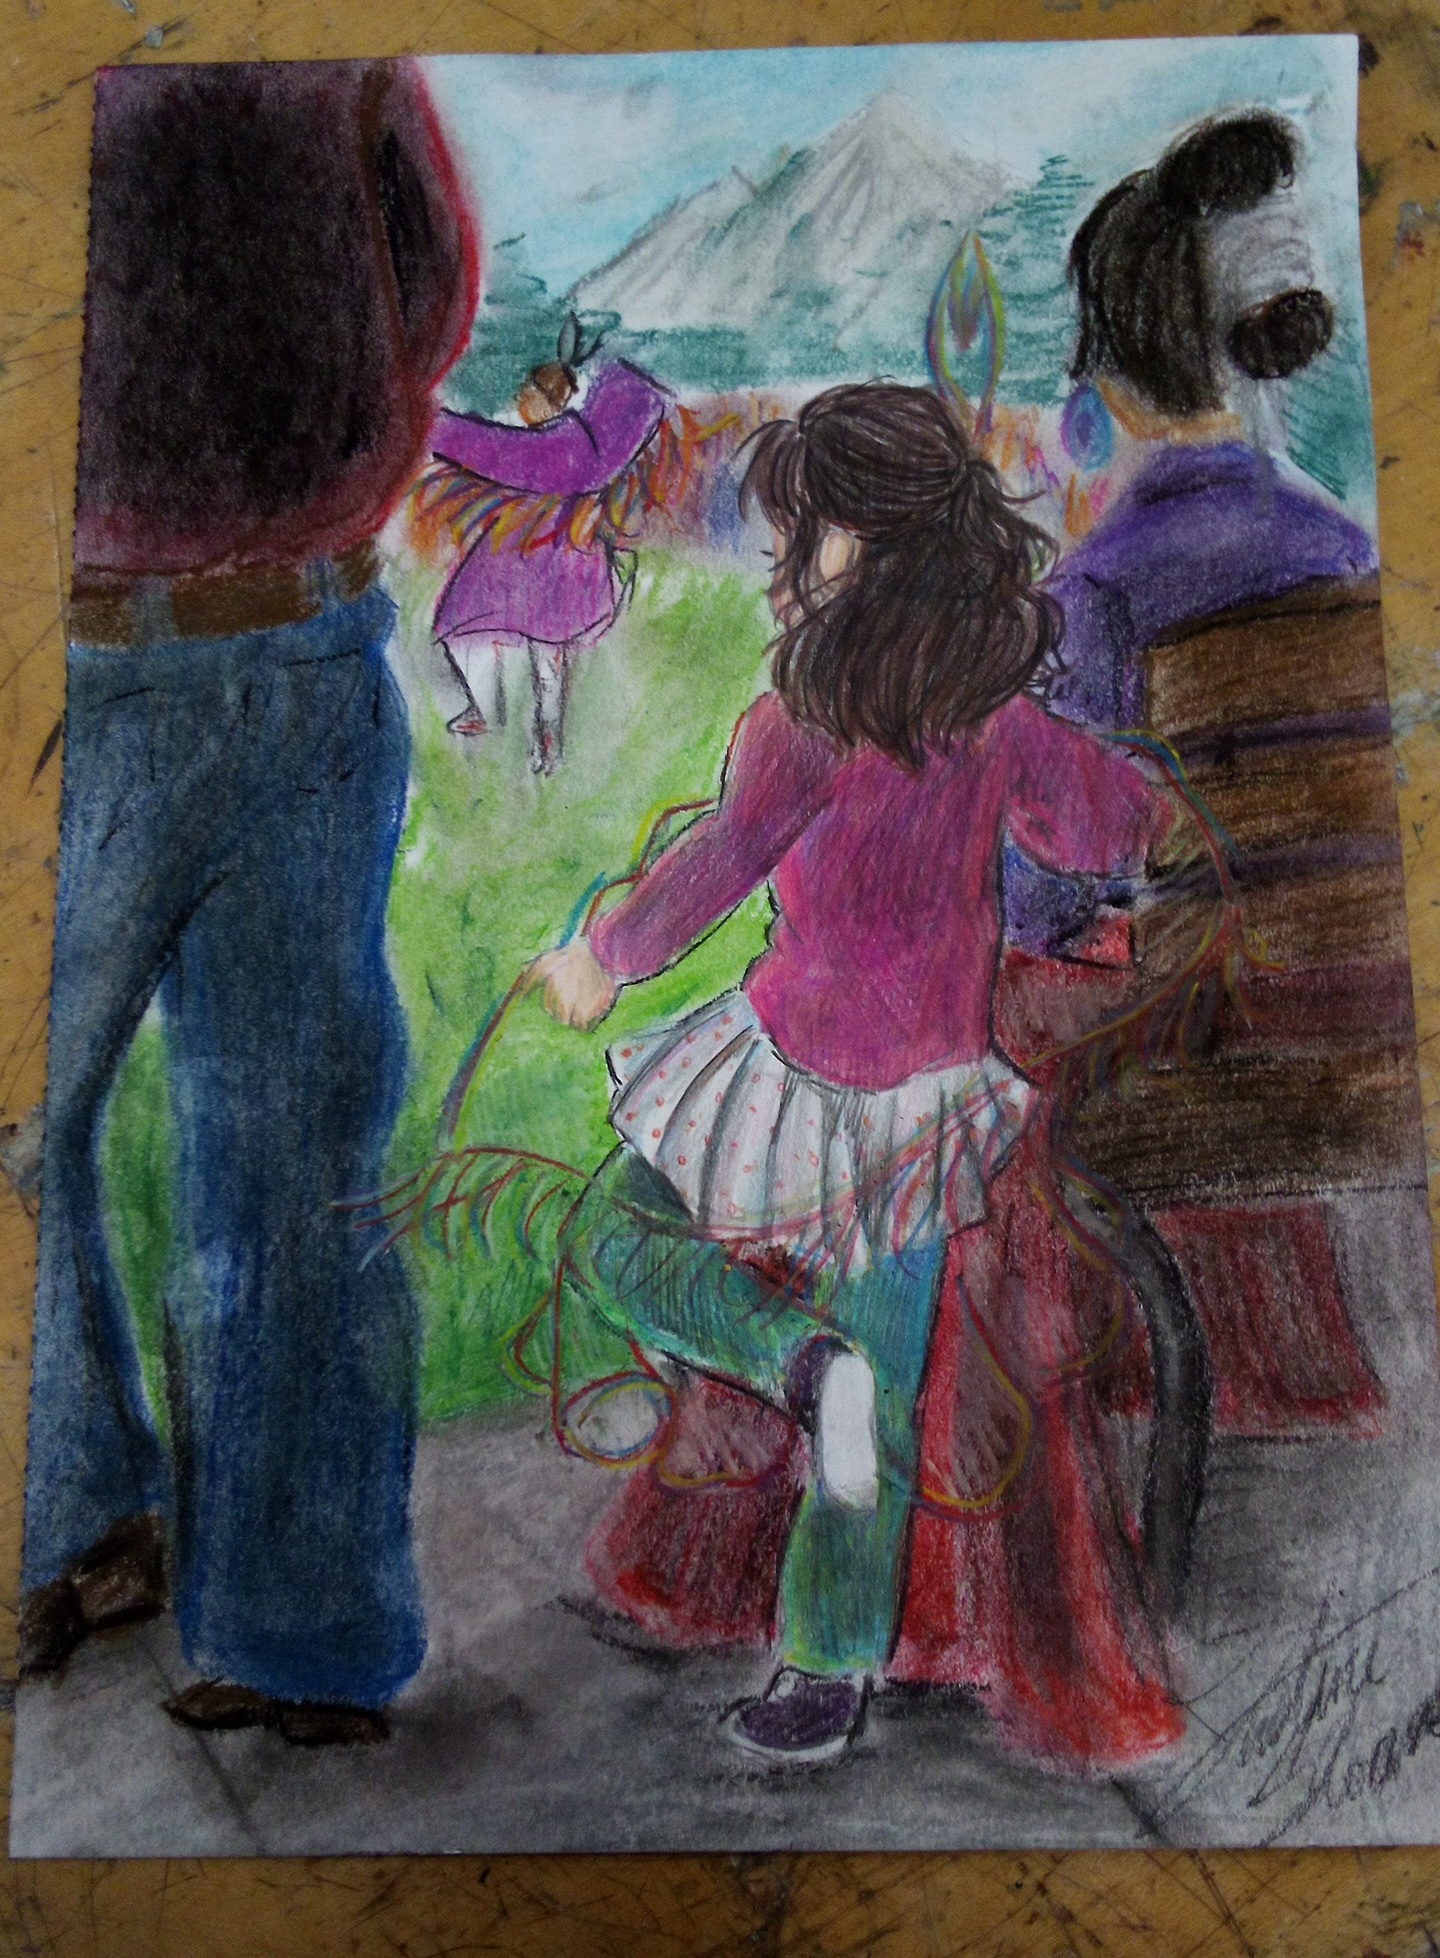 2nd Young Adult 2D Fine Arts (tie) – Future Dancer by Justine Sloan, 16 